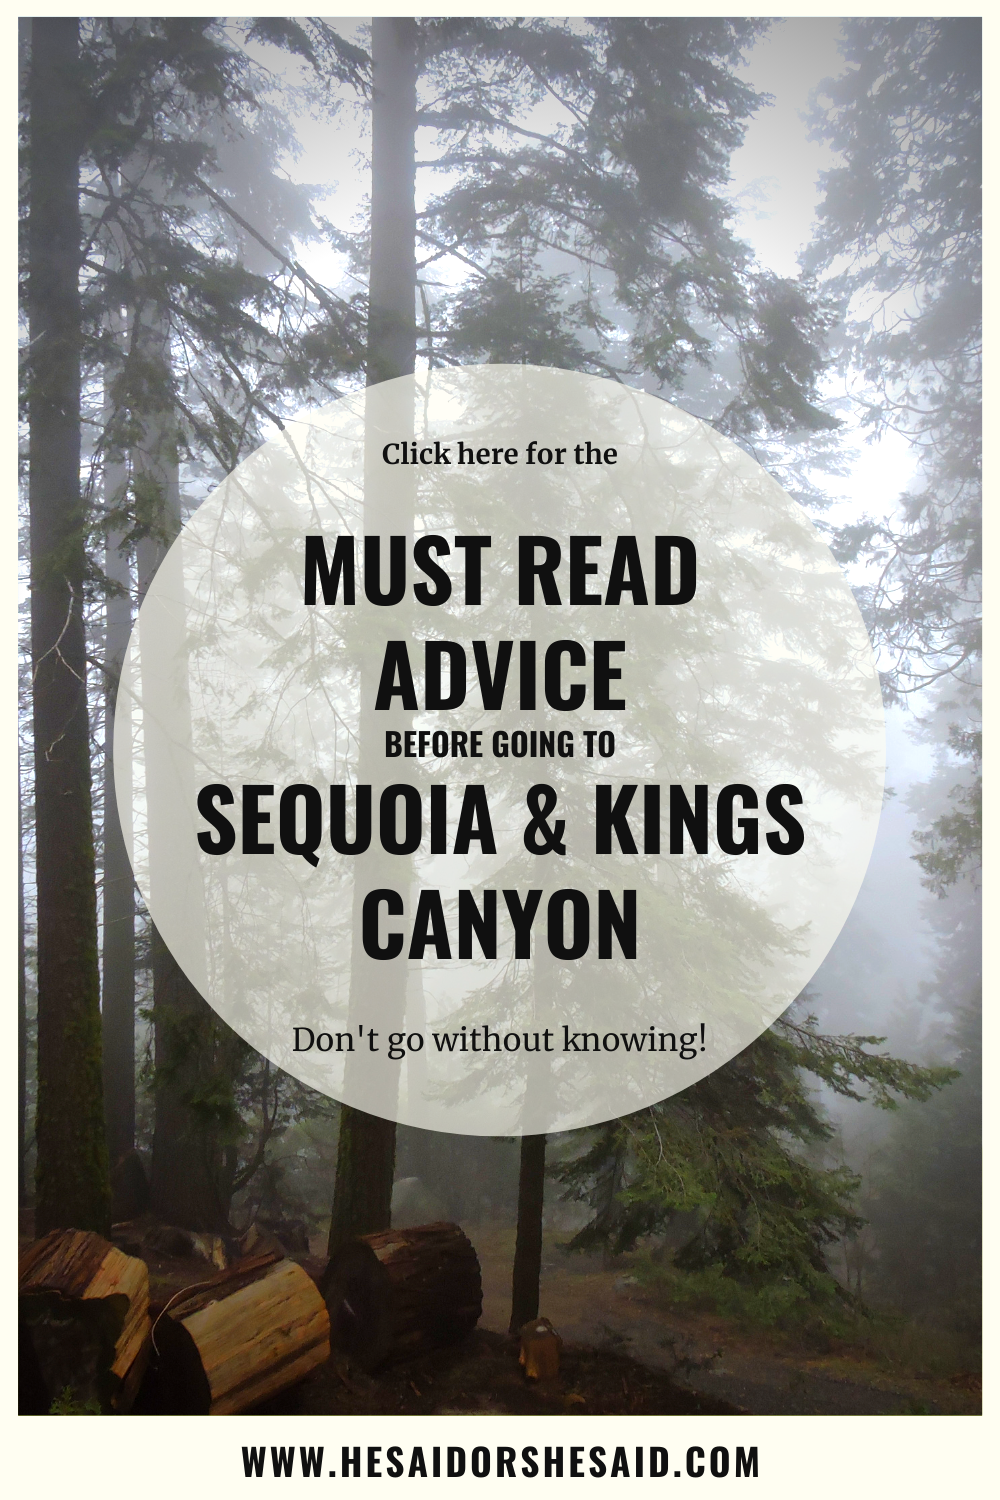 Must read advice for Sequoia and Kings Canyon National Park